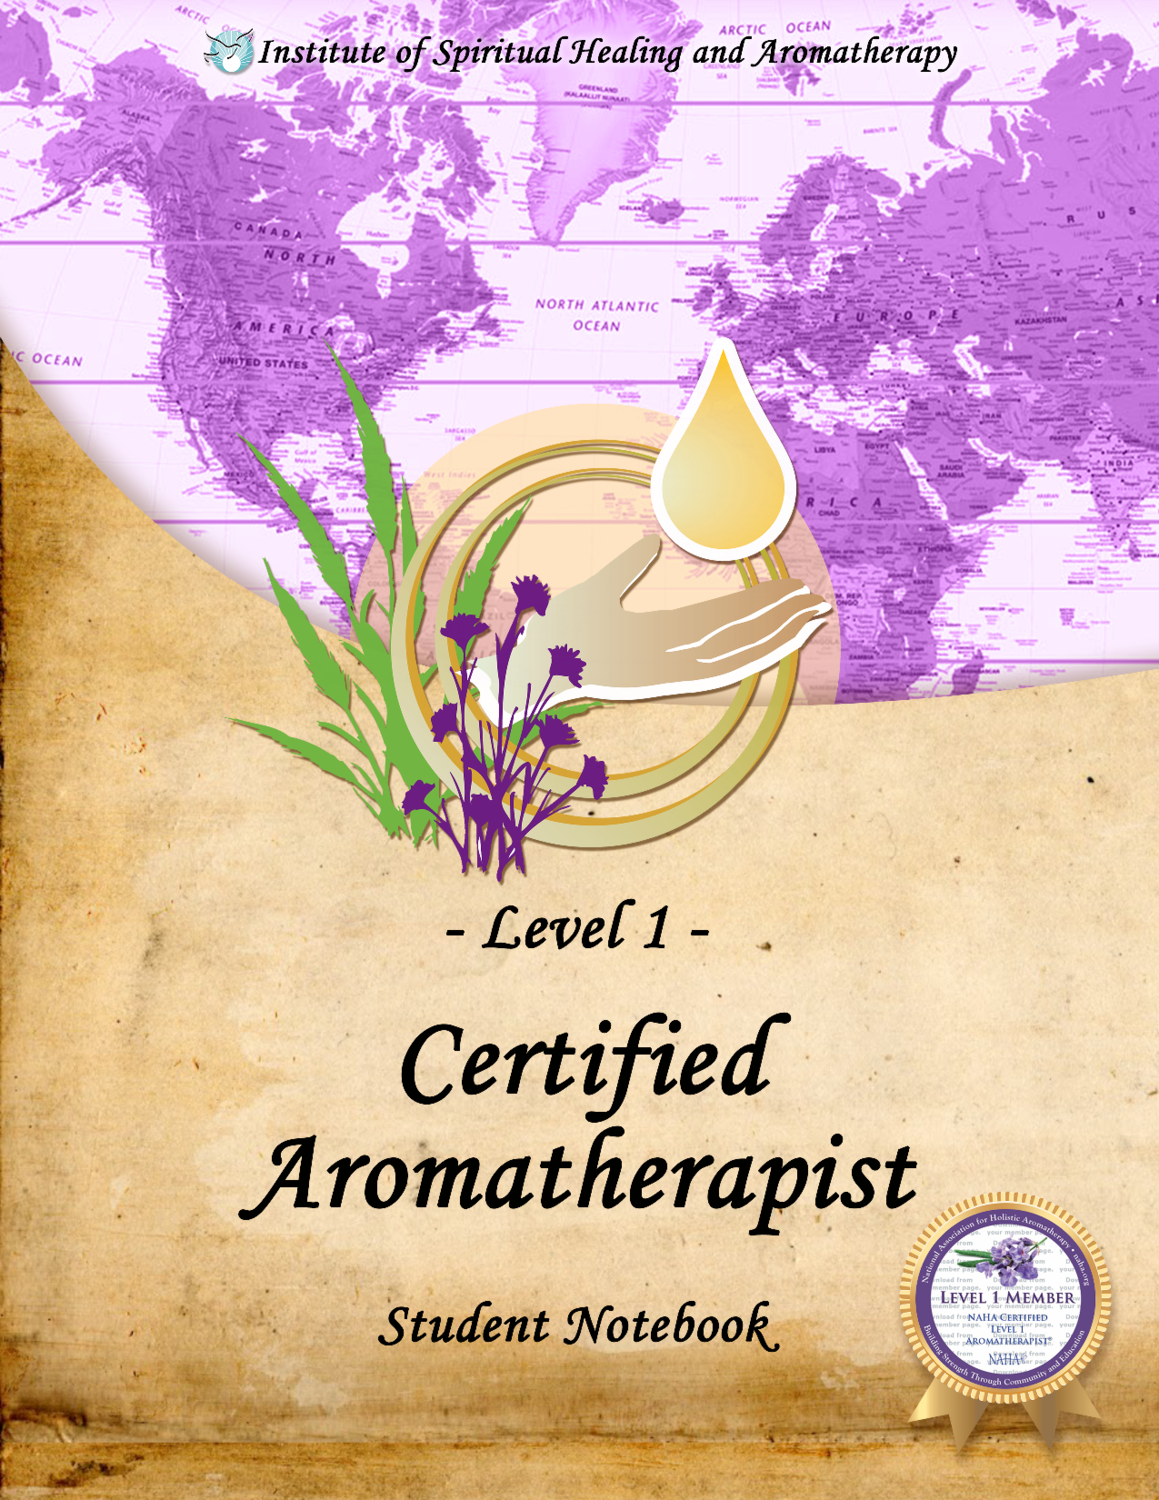 Certified Aromatherapy - Level 1 - Knoxville, TN  - June 23-25, 2023